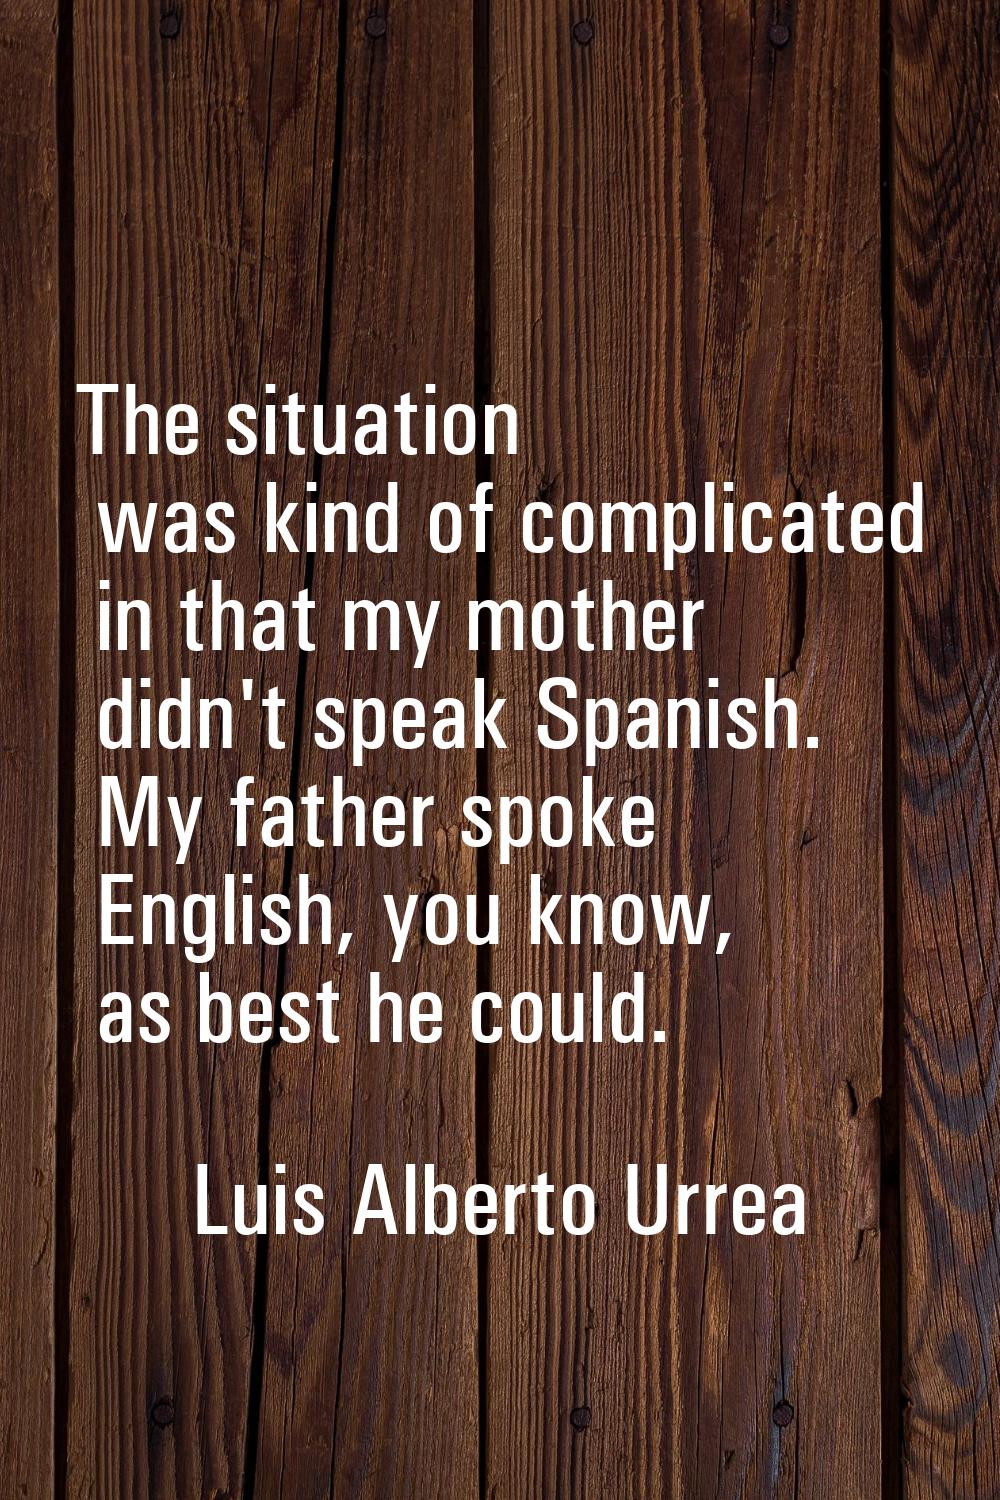 The situation was kind of complicated in that my mother didn't speak Spanish. My father spoke Engli